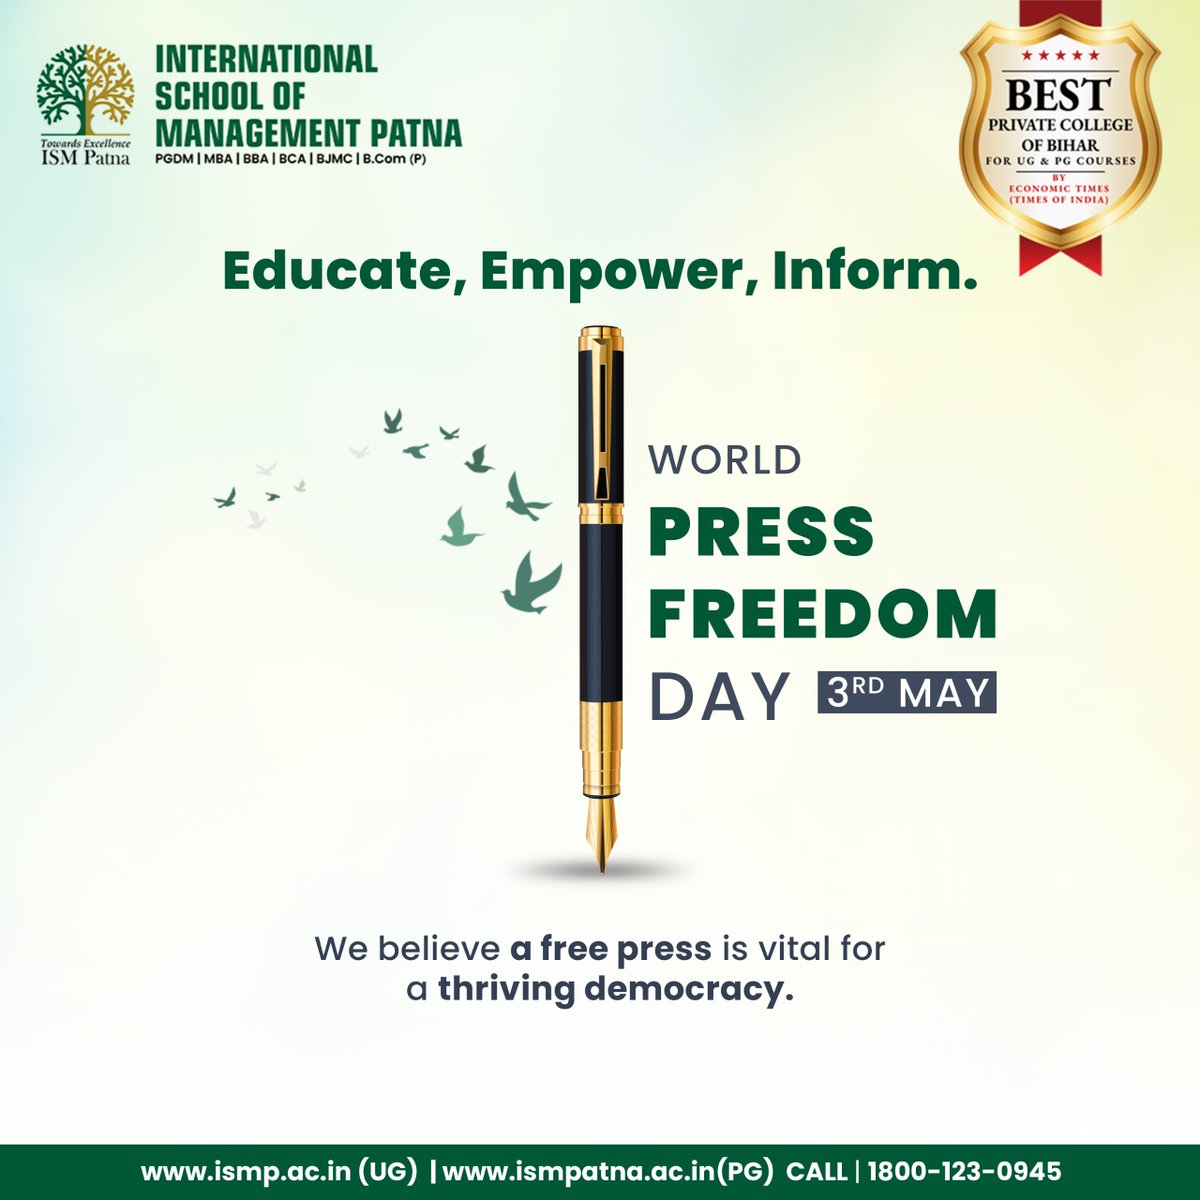 At ISM College, we nurture the next generation of responsible #journalists who value truth and free expression. Let’s uphold press freedom for a #brighterfuture.

#WorldPressFreedomDay #PressFreedom #journalism #India #Press #media #news #democracy #ISMPatna